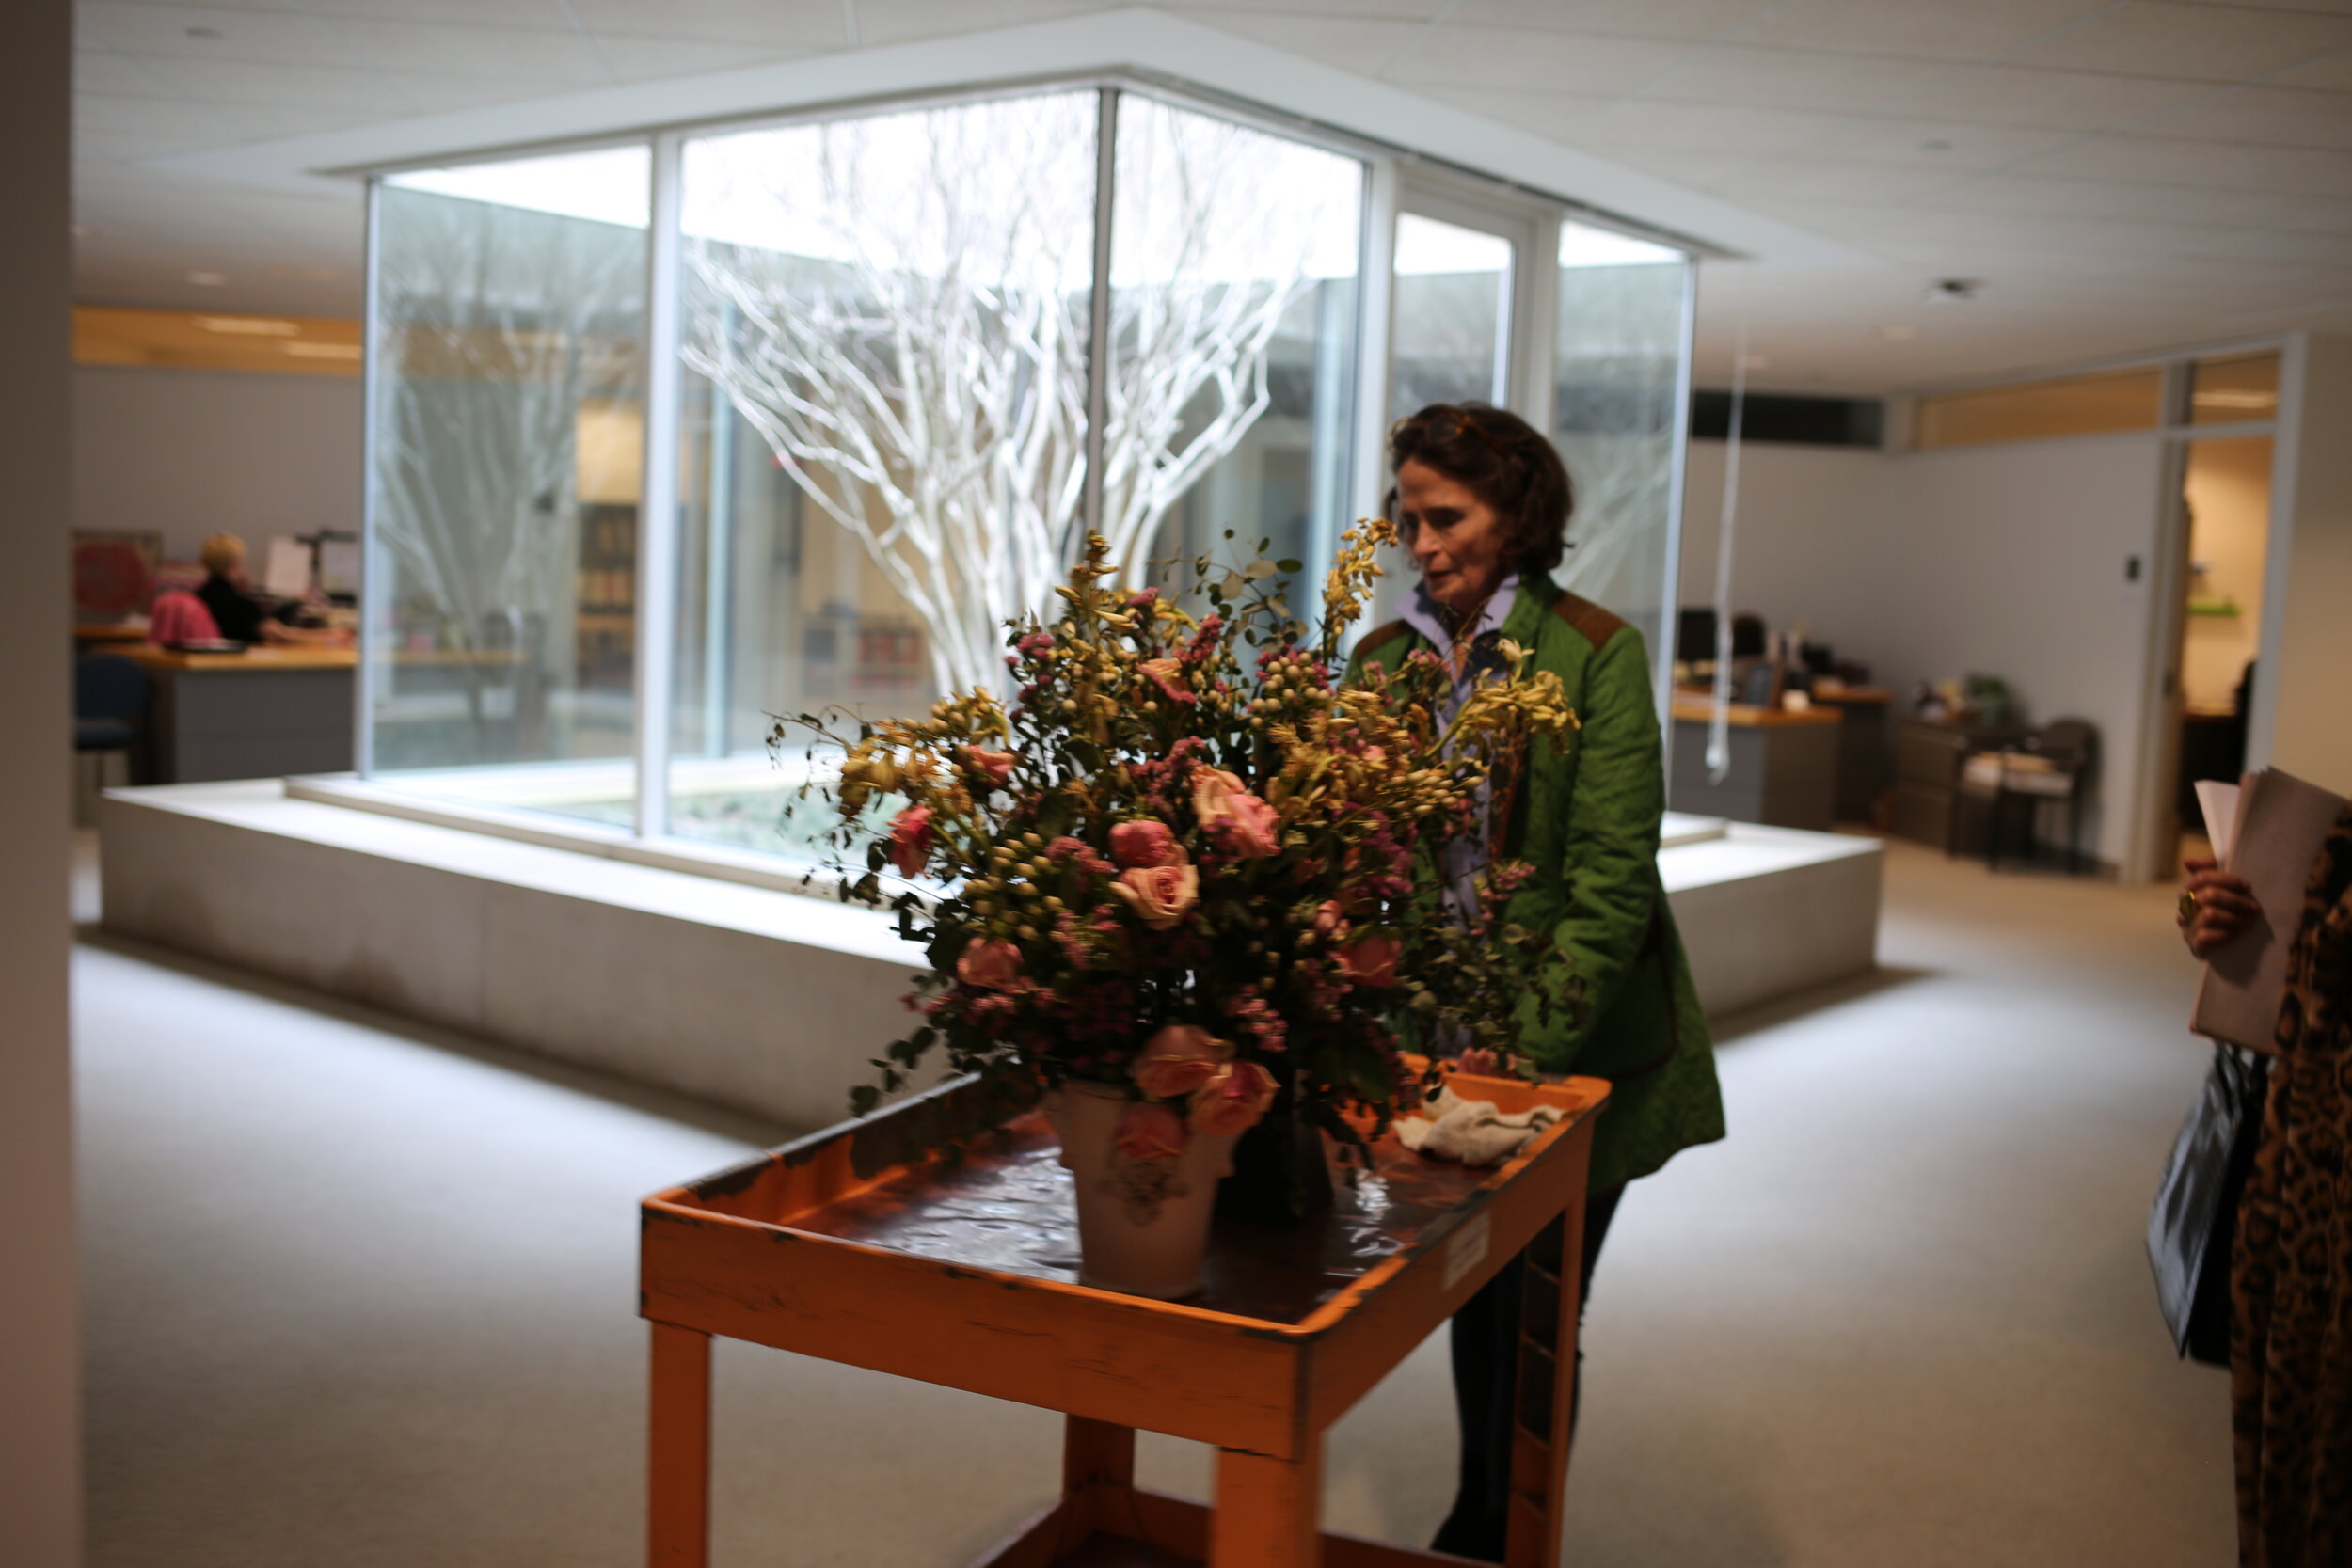 Katherine removing the floral arrangements from last week to make room for the festive Valentine week creation.